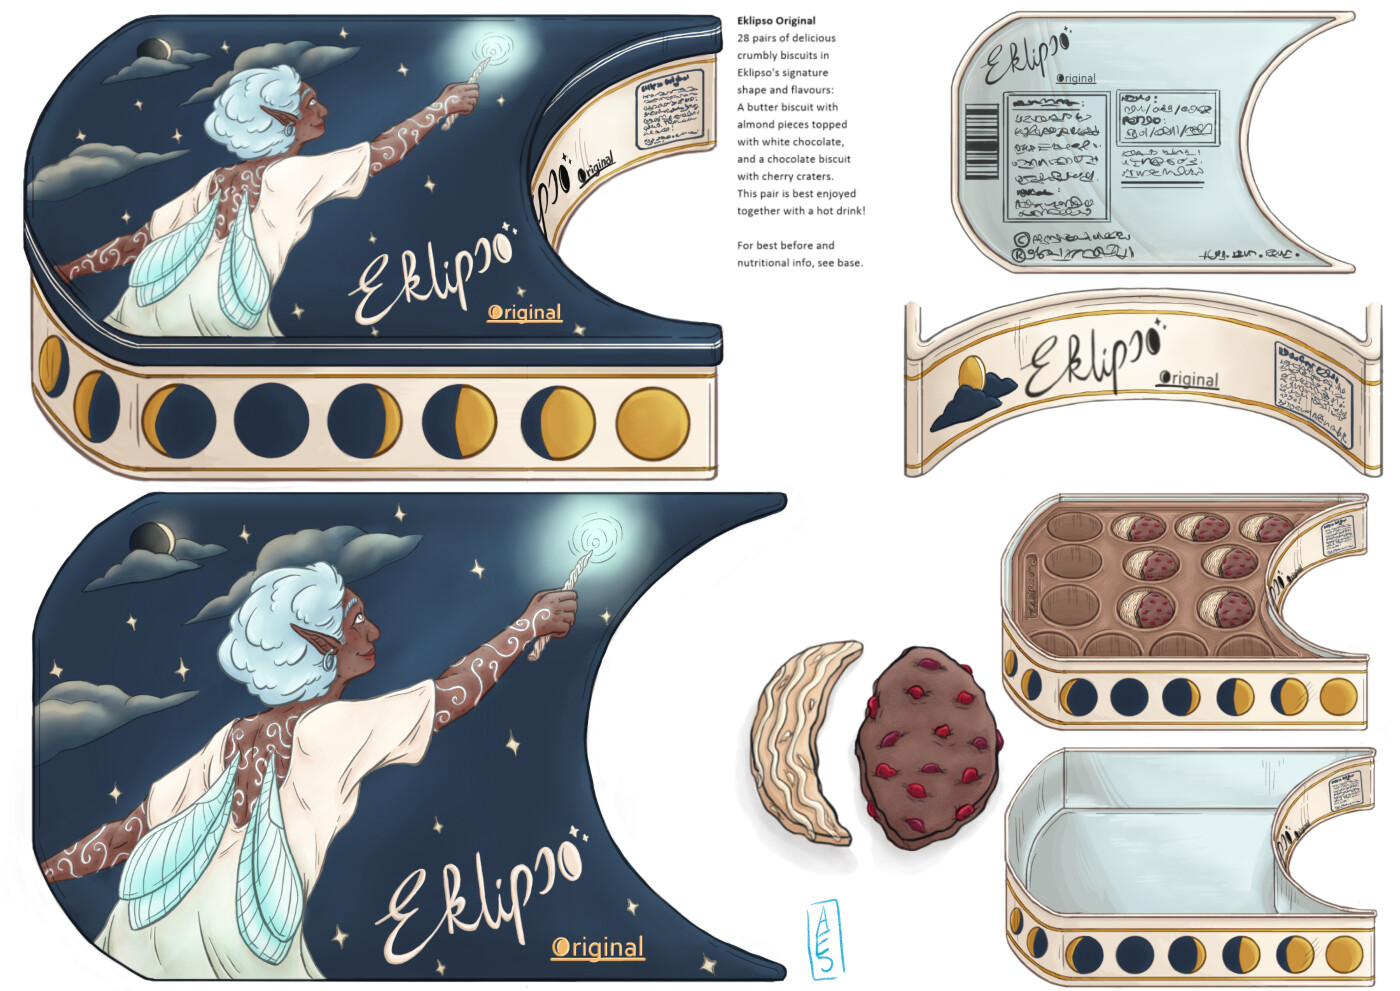 Final Biscuit Tin Concept With Breakdown